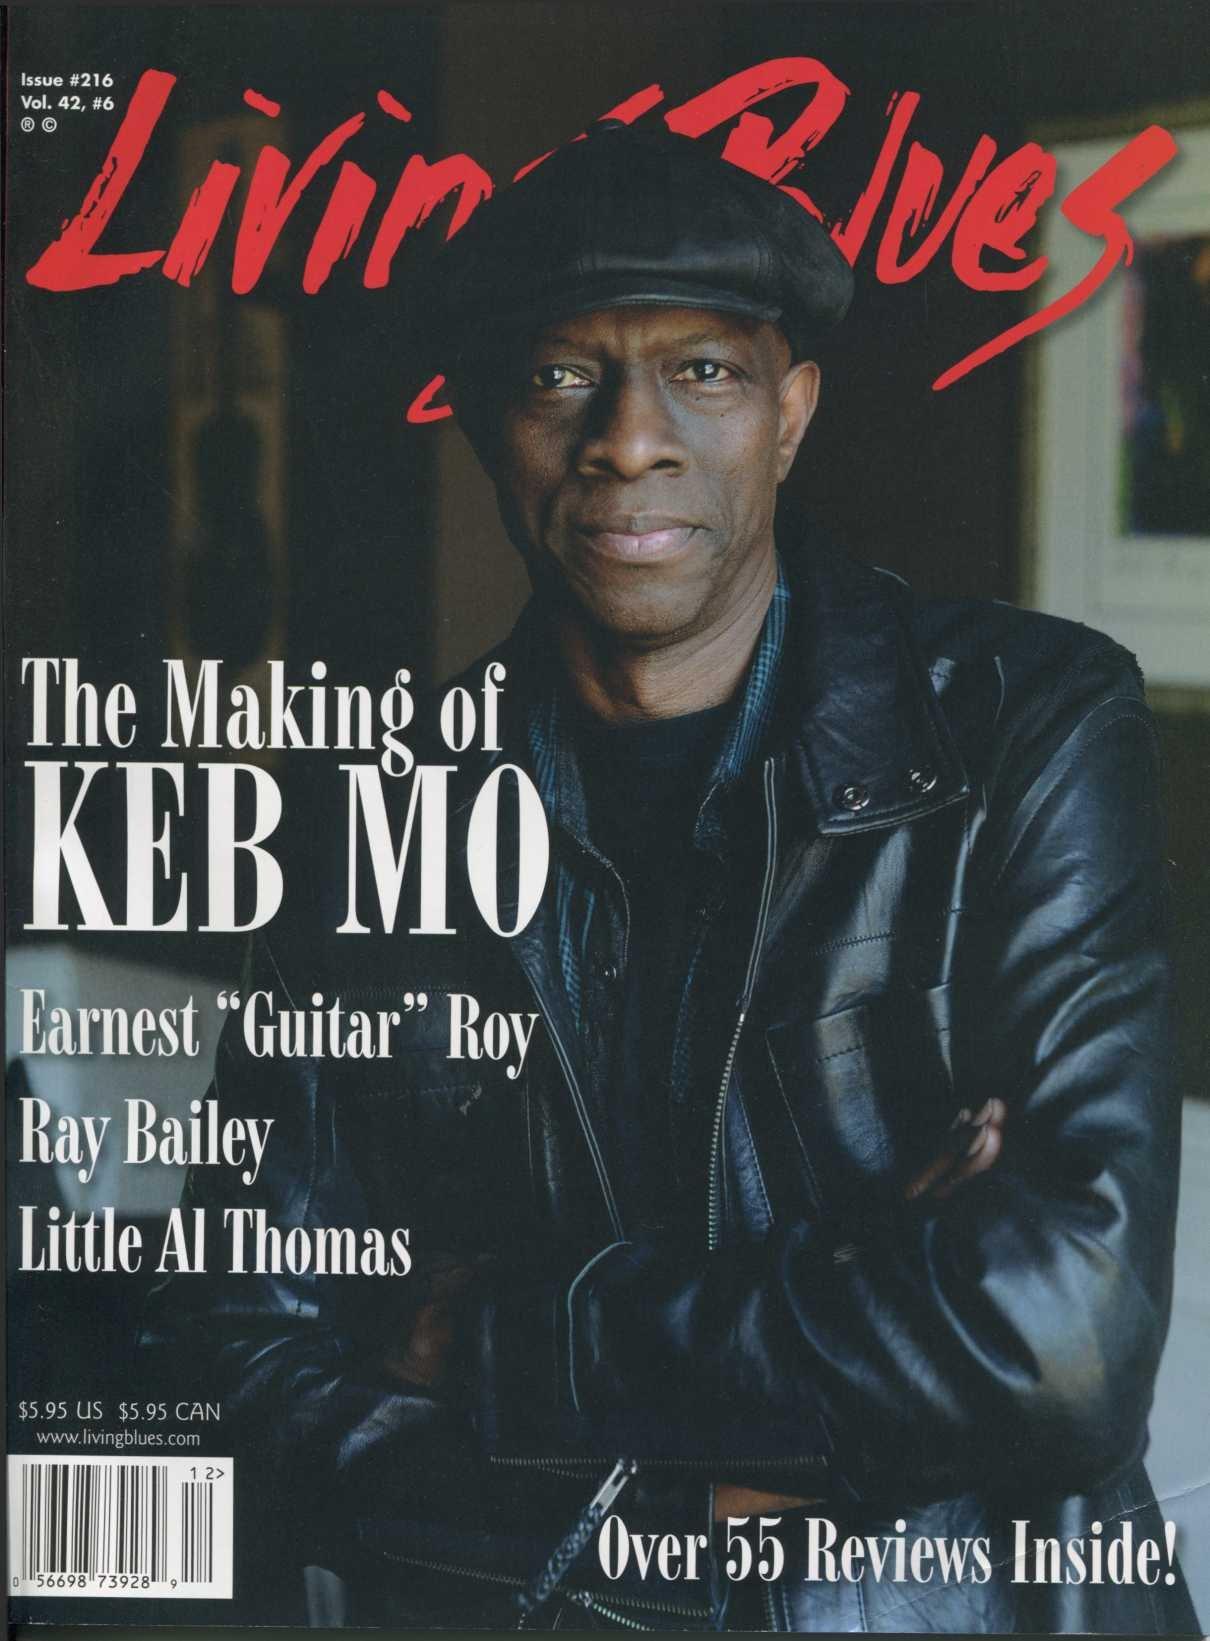 Keb' Mo' on the cover of Living Blues magazine in 2012